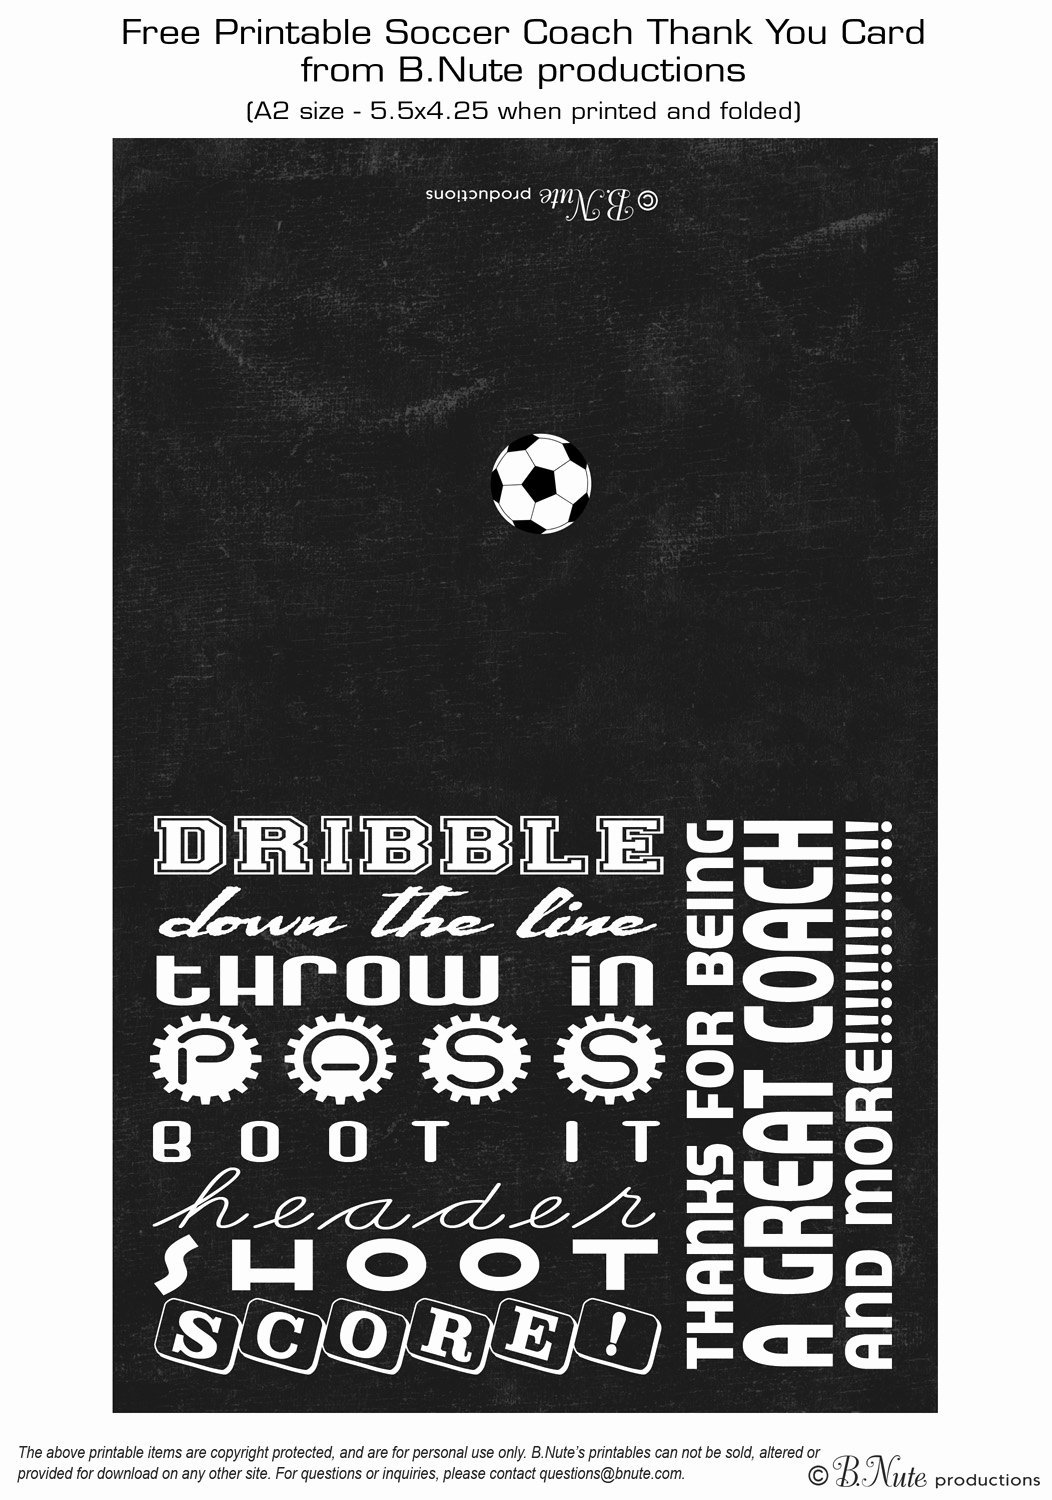 Coach Thank You Cards Awesome Bnute Productions Free Printable soccer Coach Thank You Card